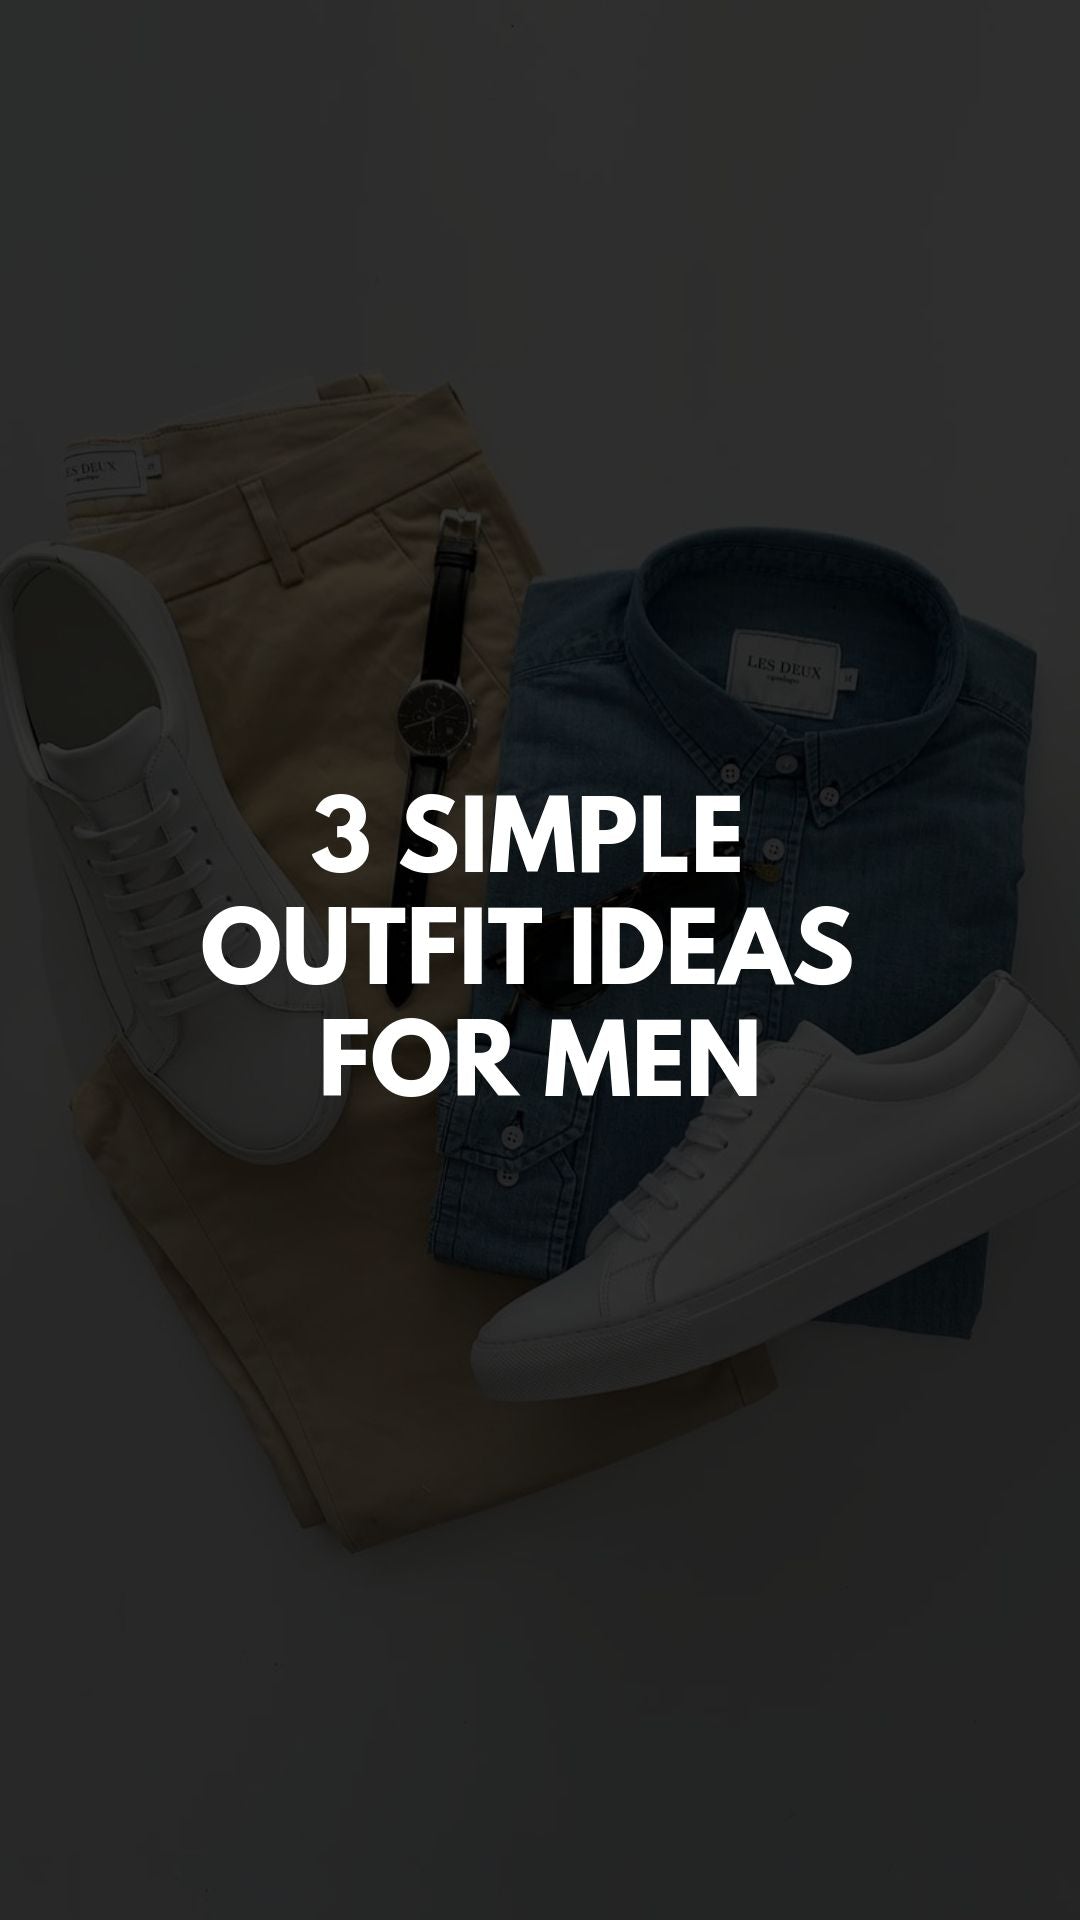 3 SIMPLE   OUTFIT IDEAS   FOR MEN